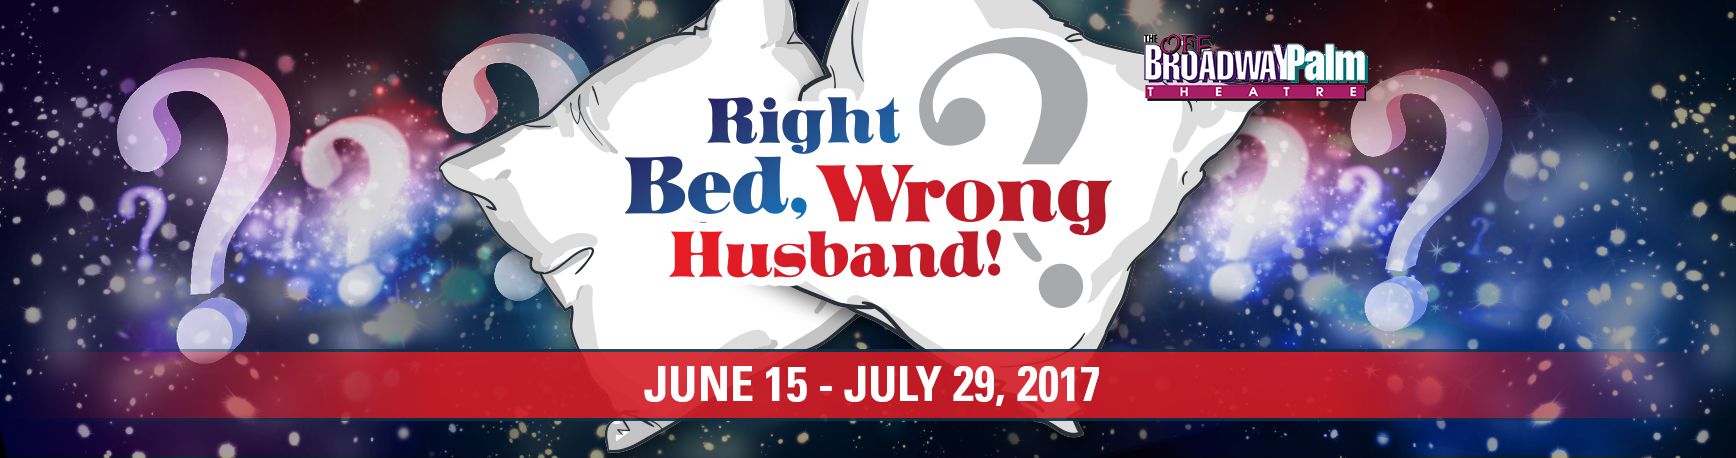 White lie turns into real whopper in Off Broadway Palm’s ‘Right Bed, Wrong Husband’